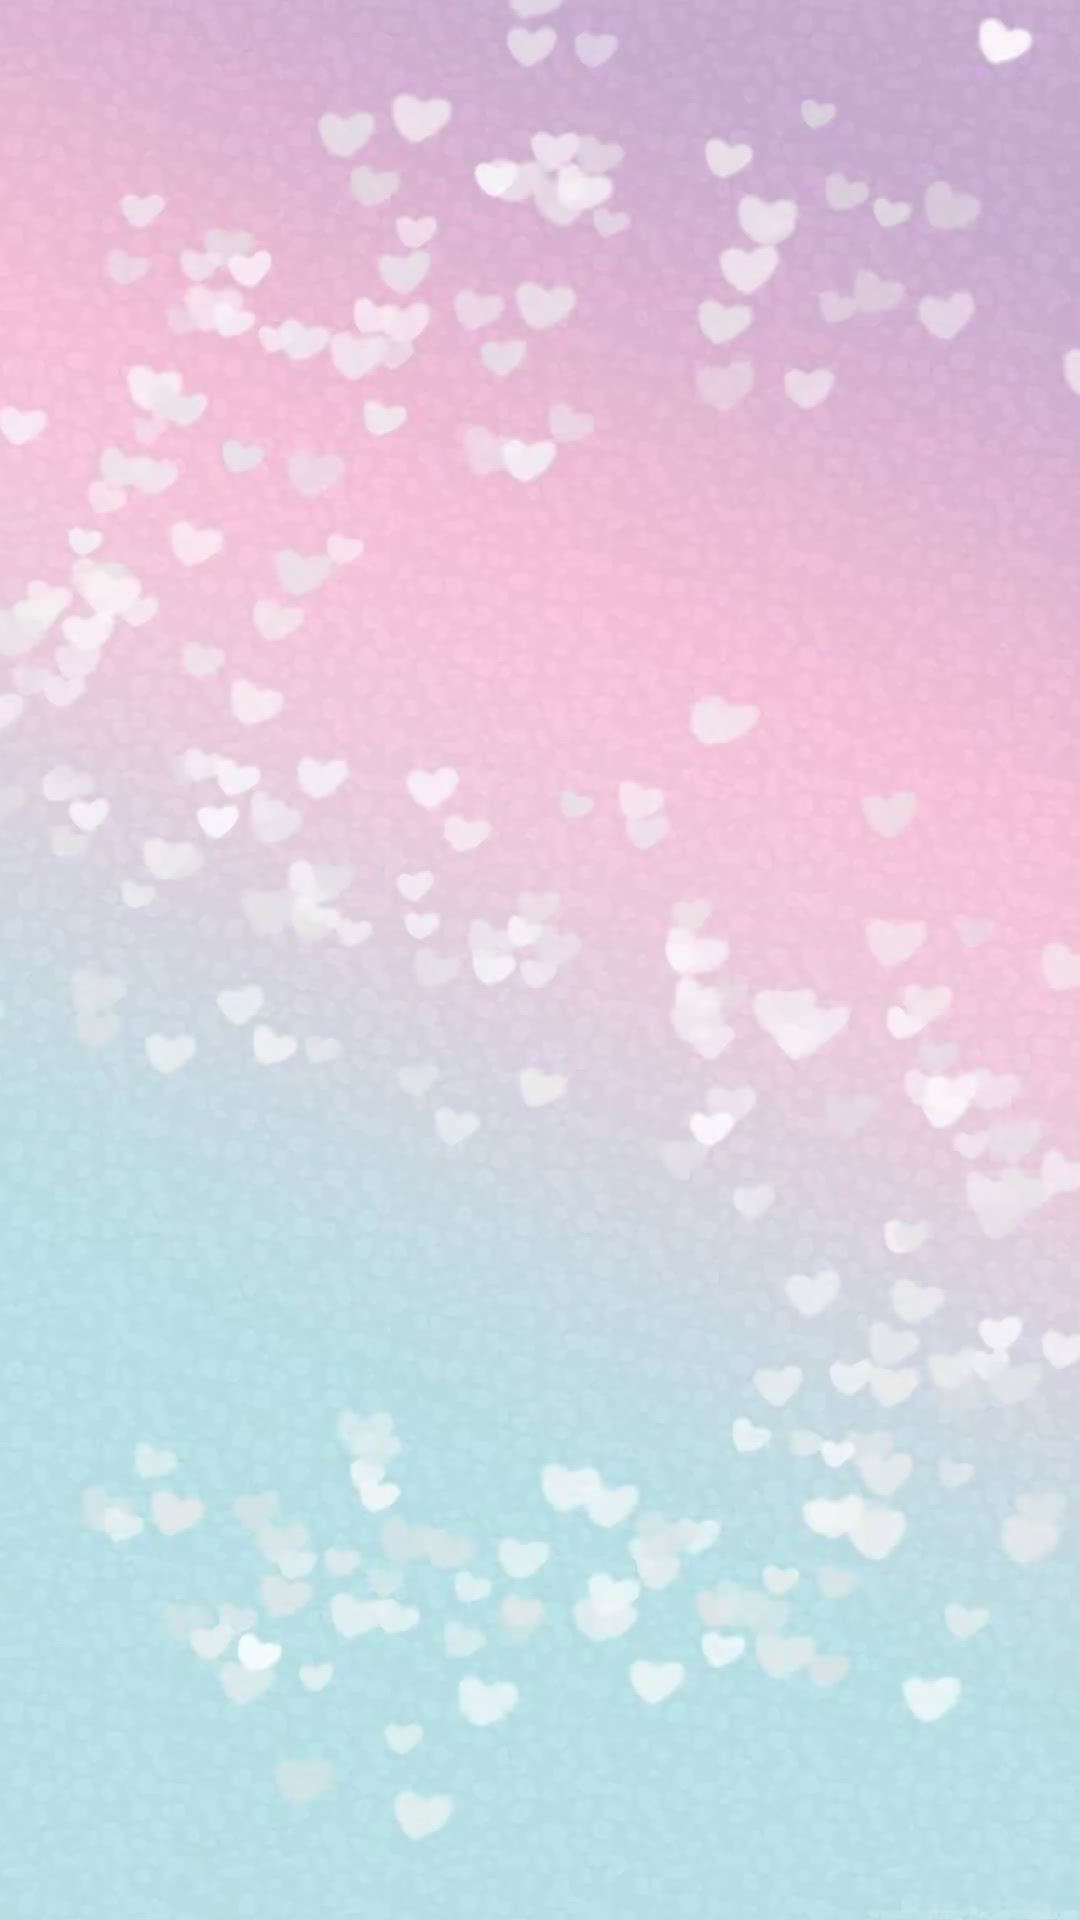 Pastel Heart Pattern Iphone Wallpapers